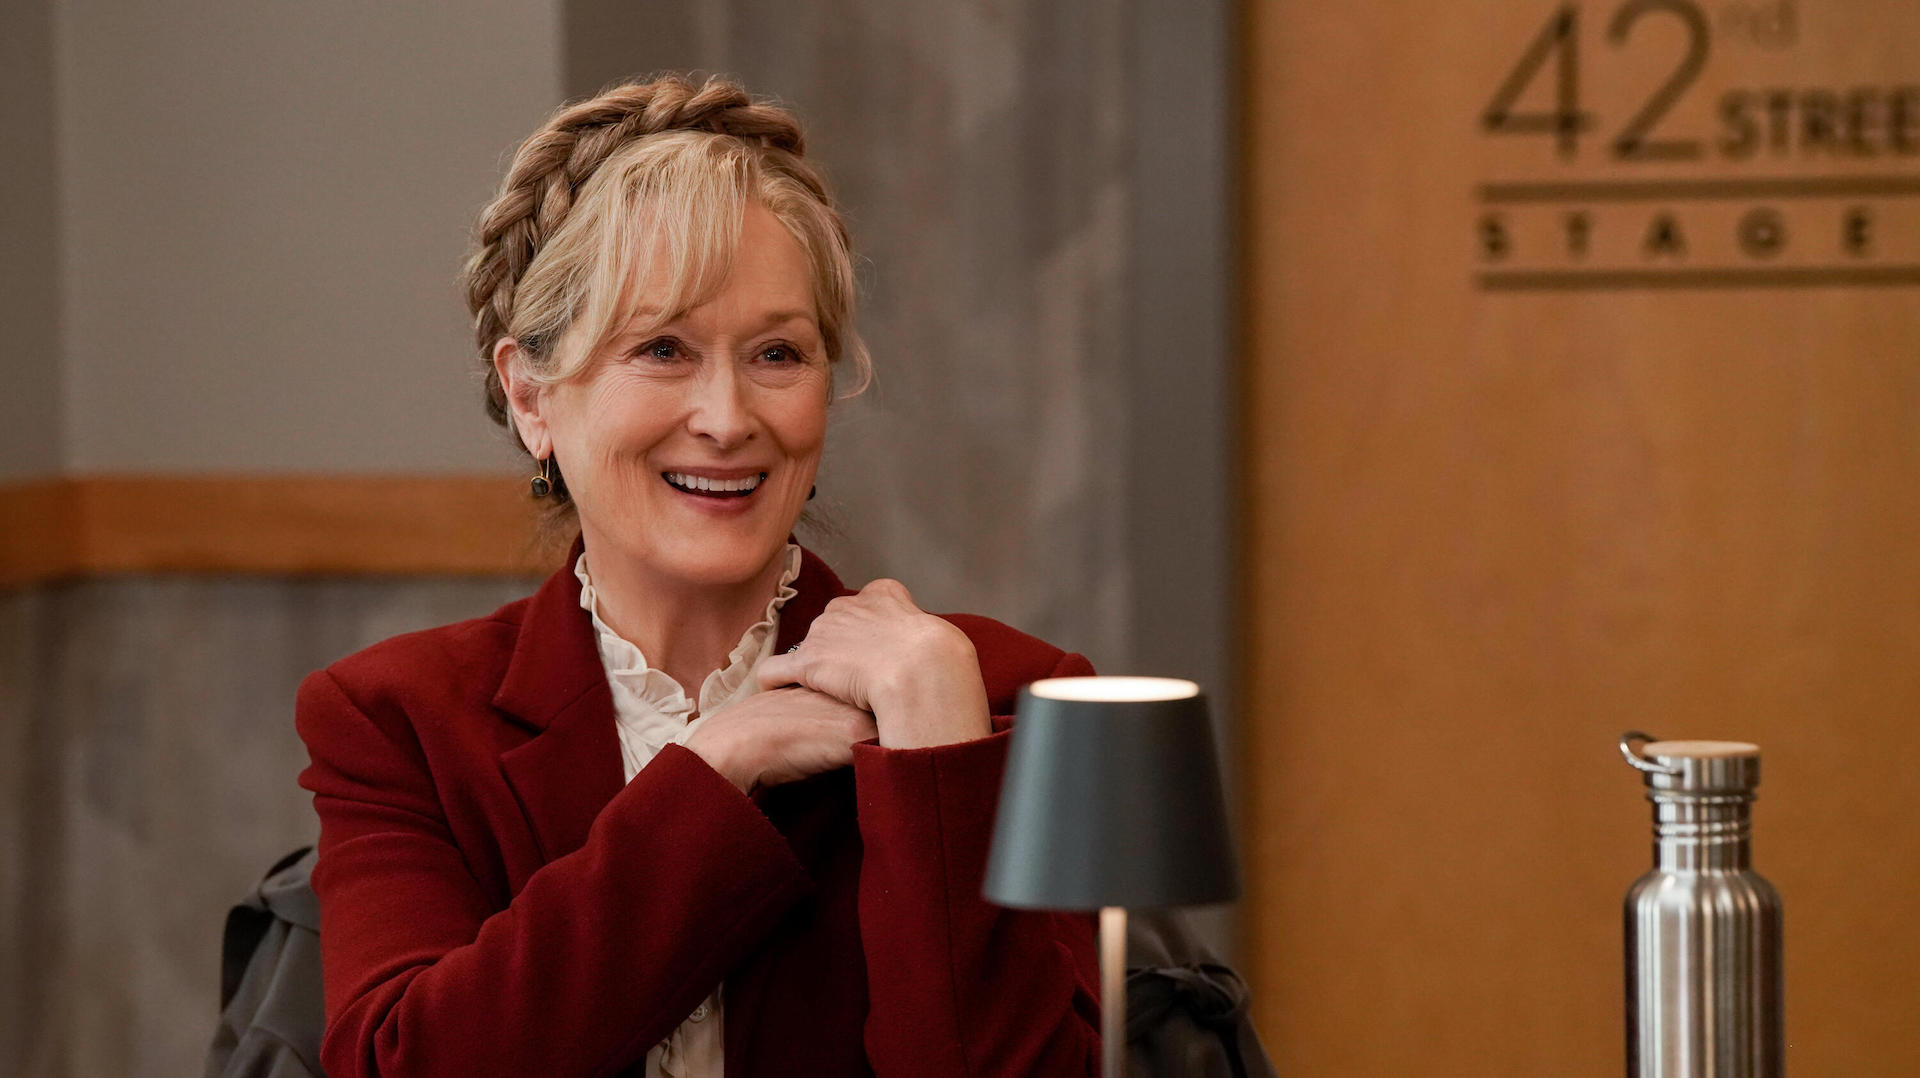 A woman with gray-blond hair wrapped in a Dutch braid, wearing a red blazer and looking delighted; still of Meryl Streep from "Only Murders in the Building"